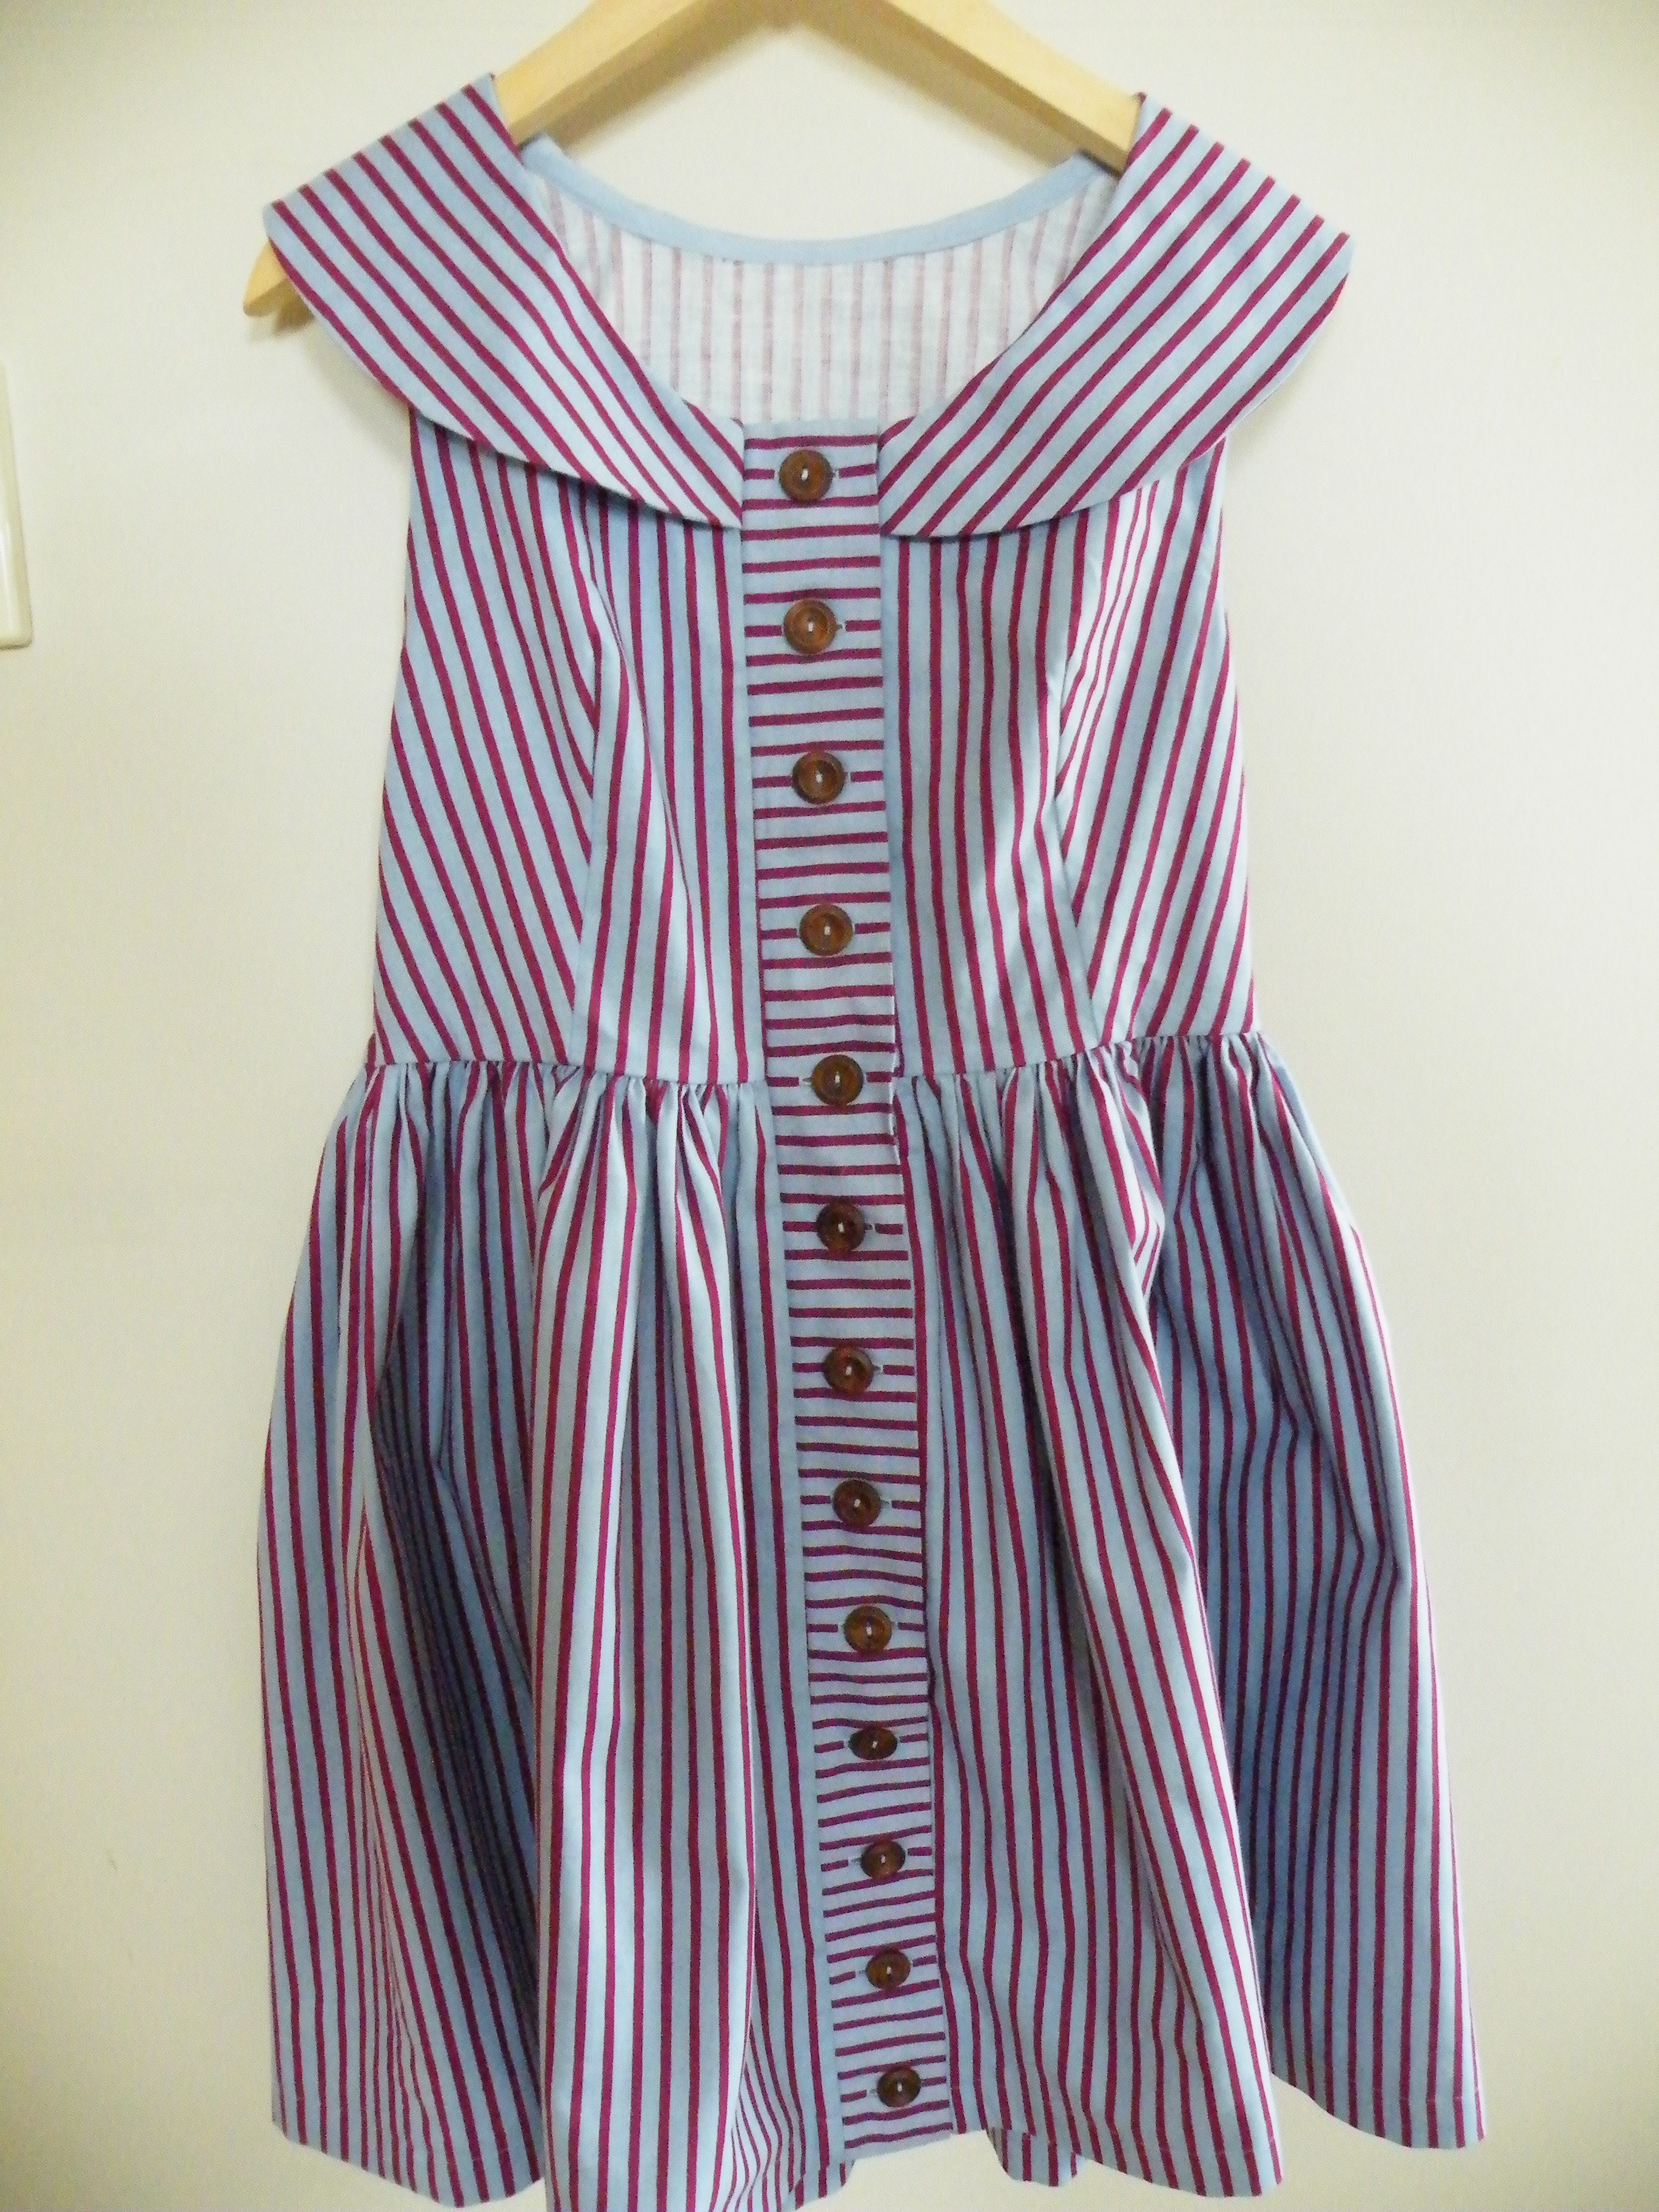 Shirtwaister dress – Sewing Projects | BurdaStyle.com